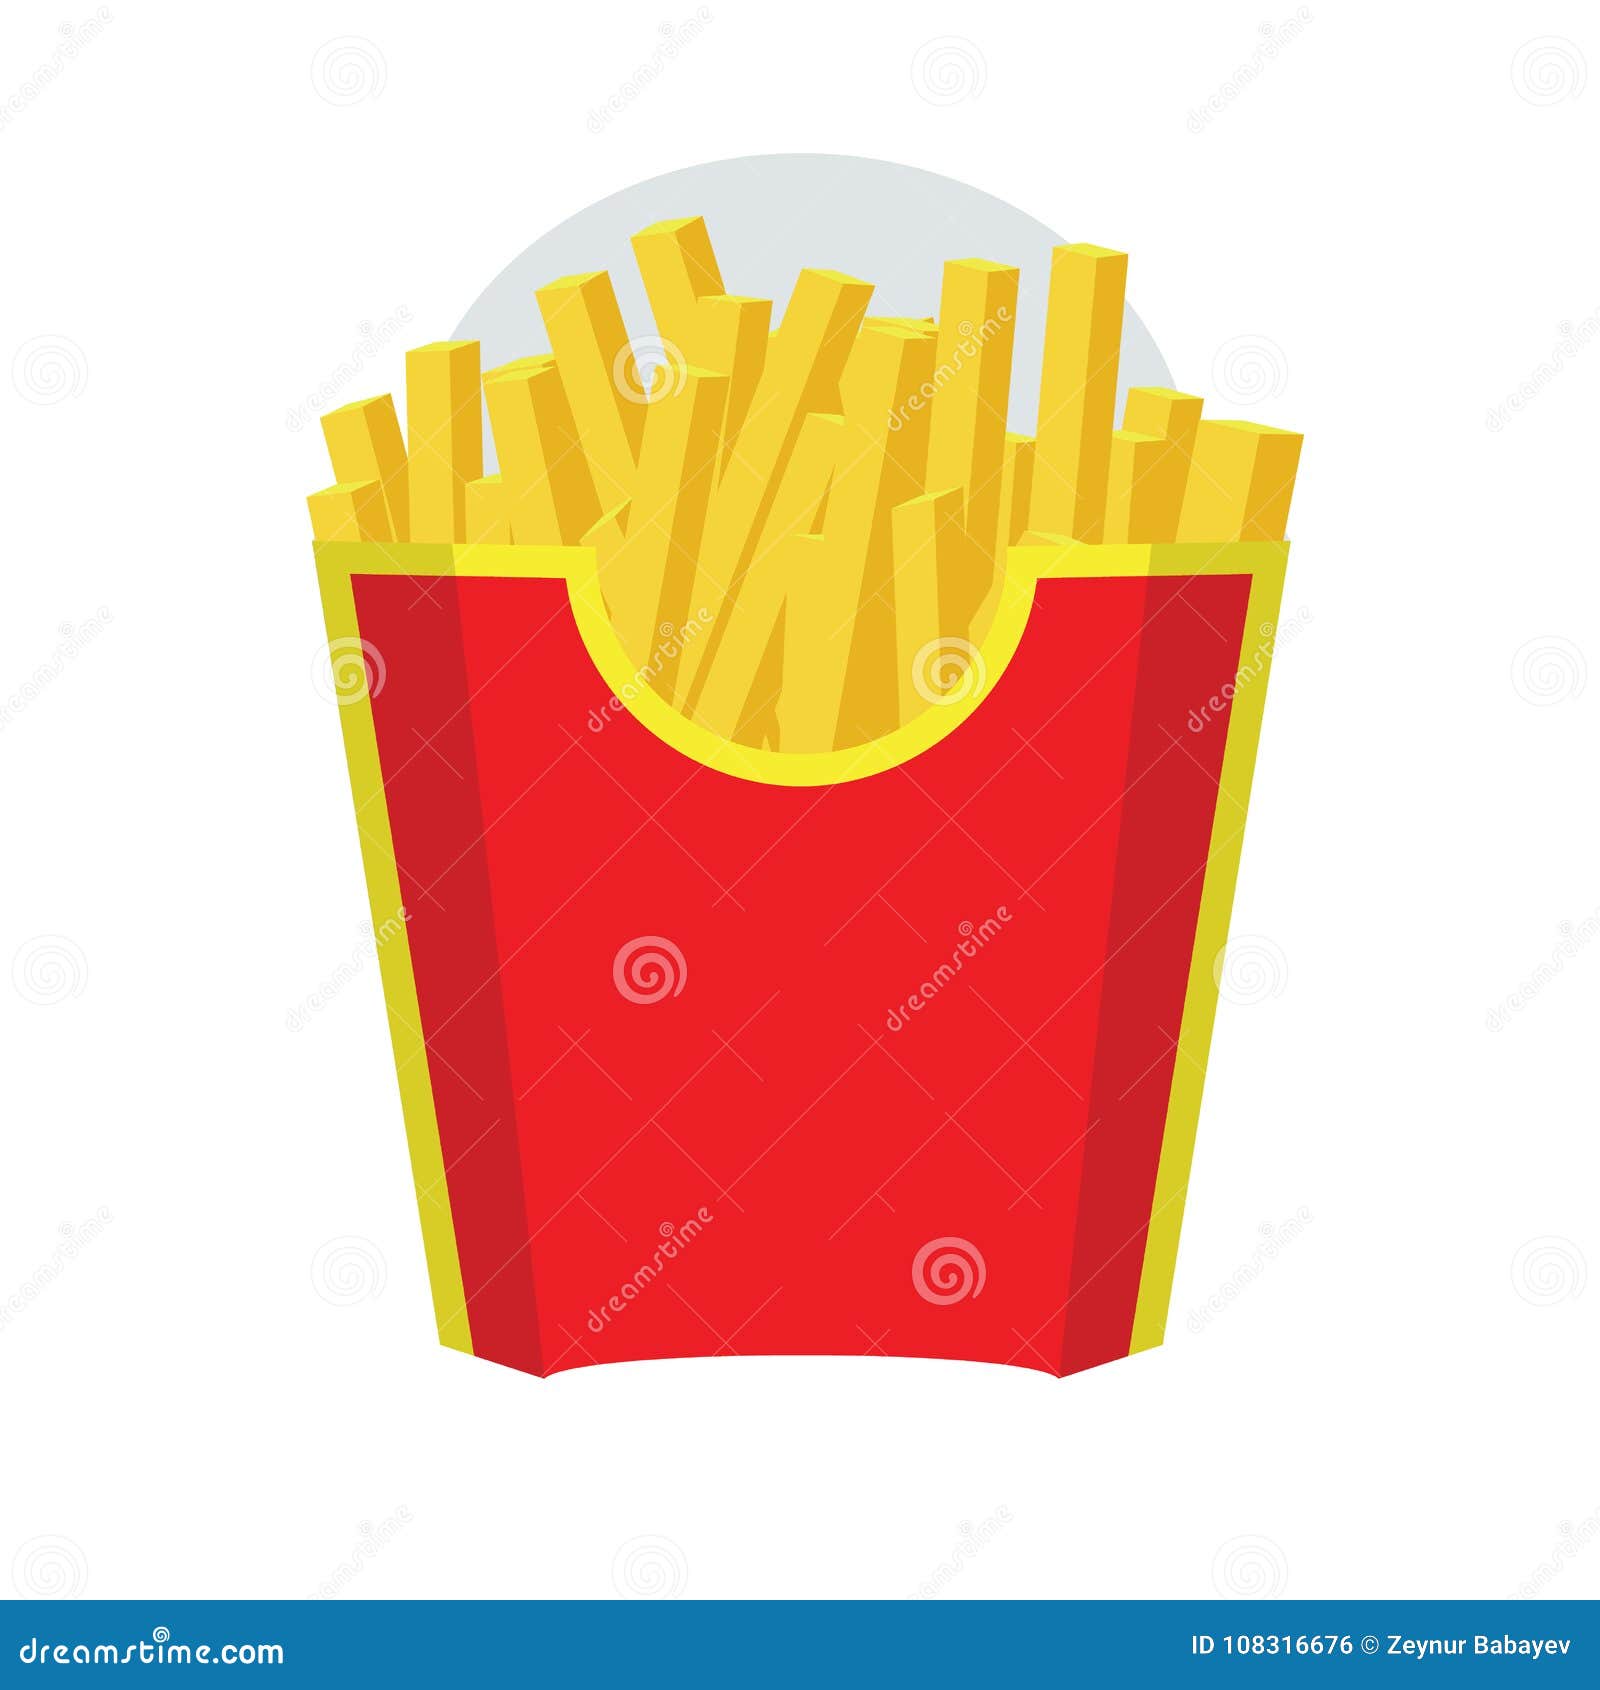 Kraft Paper Large Size Packaging w/ French Fries Mockup - Free Download  Images High Quality PNG, JPG